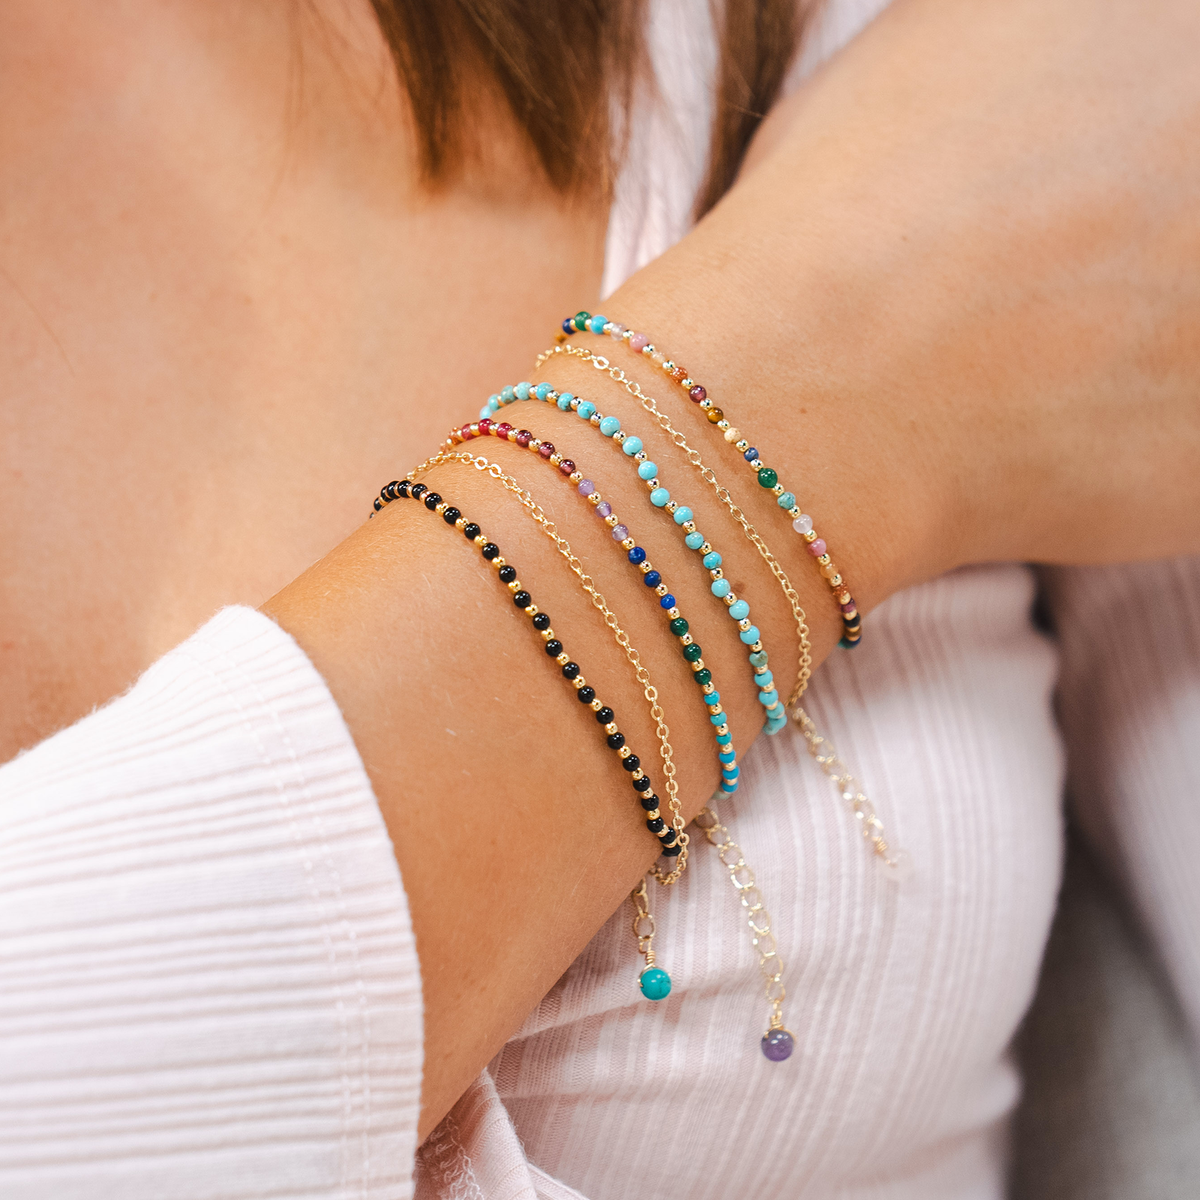 Model wearing a healing bracelet stack. The bracelets include a onyx stone and gold bead healing bracelet, a 2mm multicolor stone and gold bead healing bracelet, a 2mm turquoise stone and gold bead healing bracelet, and a 2mm multicolor stone and gold bead healing bracelet